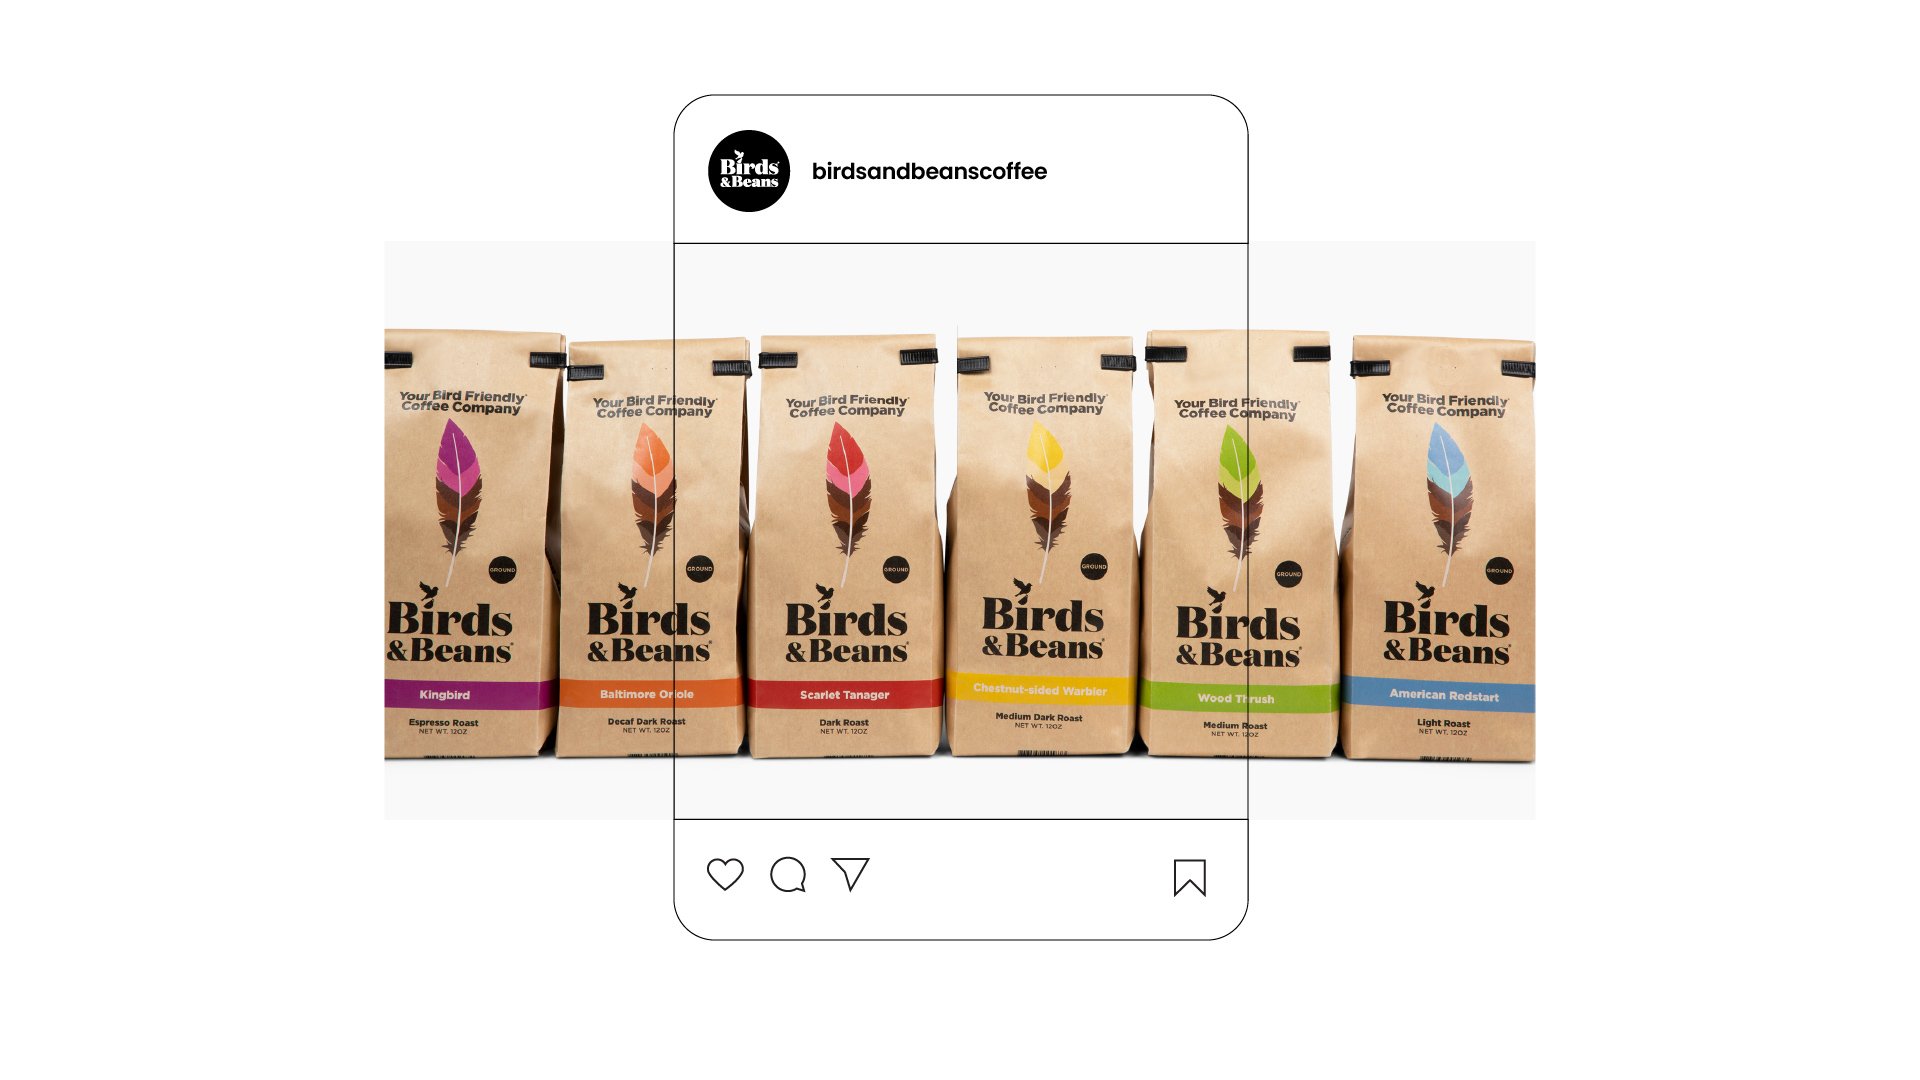 Six Birds & Beans coffee bags sit side by side. The image extends beyond the outline of an Instagram post illustrating how this image could be used as a carousel.